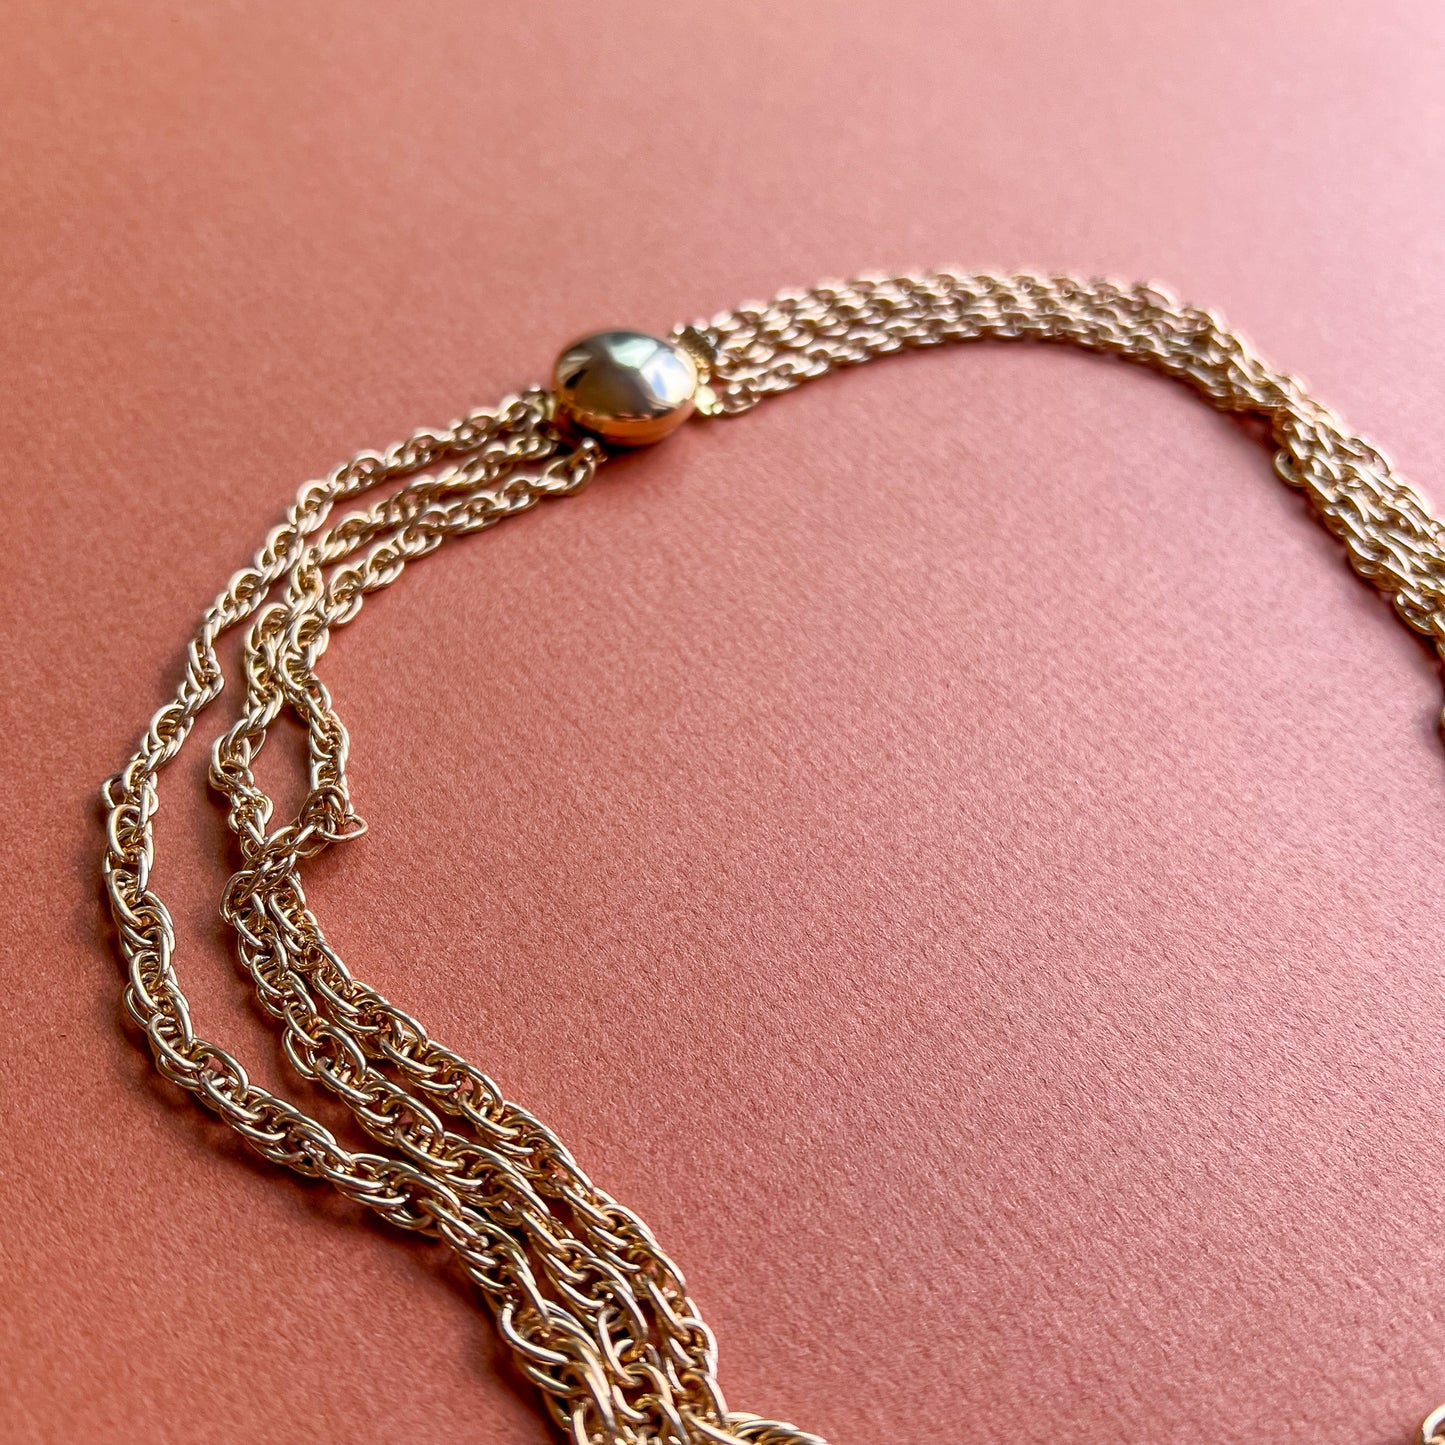 1980s 3-Layered Long Chain Necklace